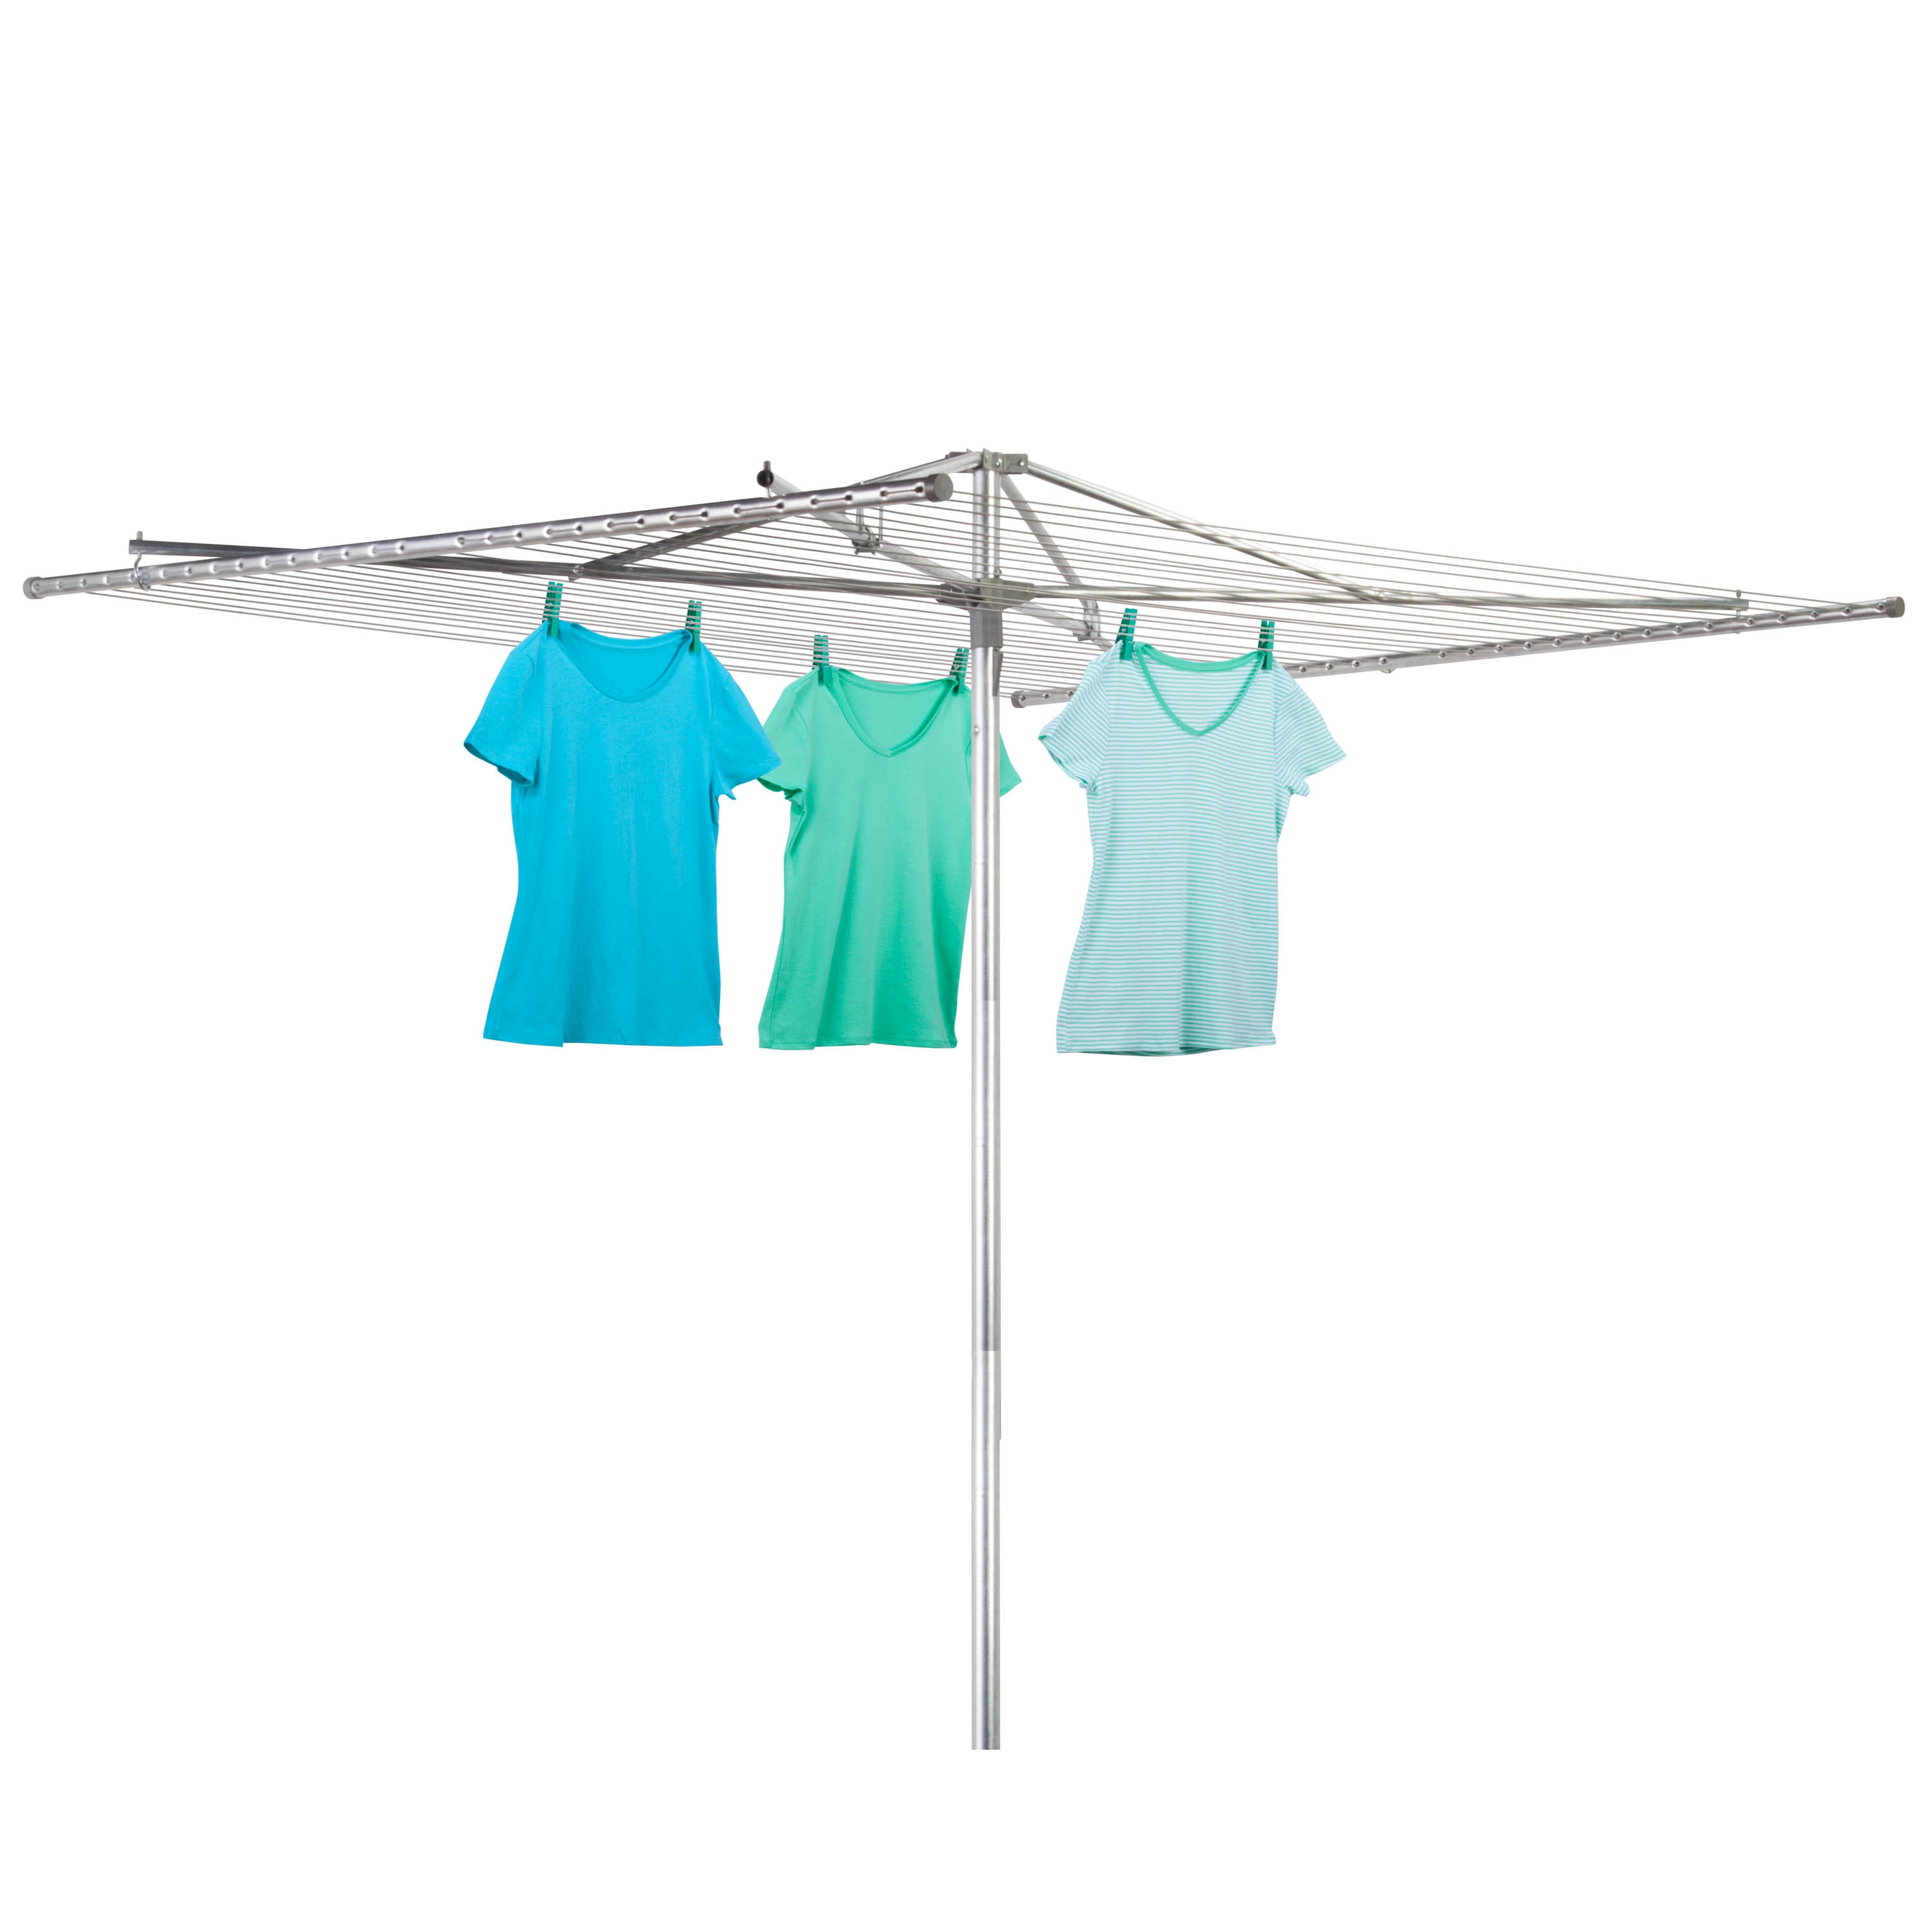 Outdoor Clotheslines & Drying Racks at